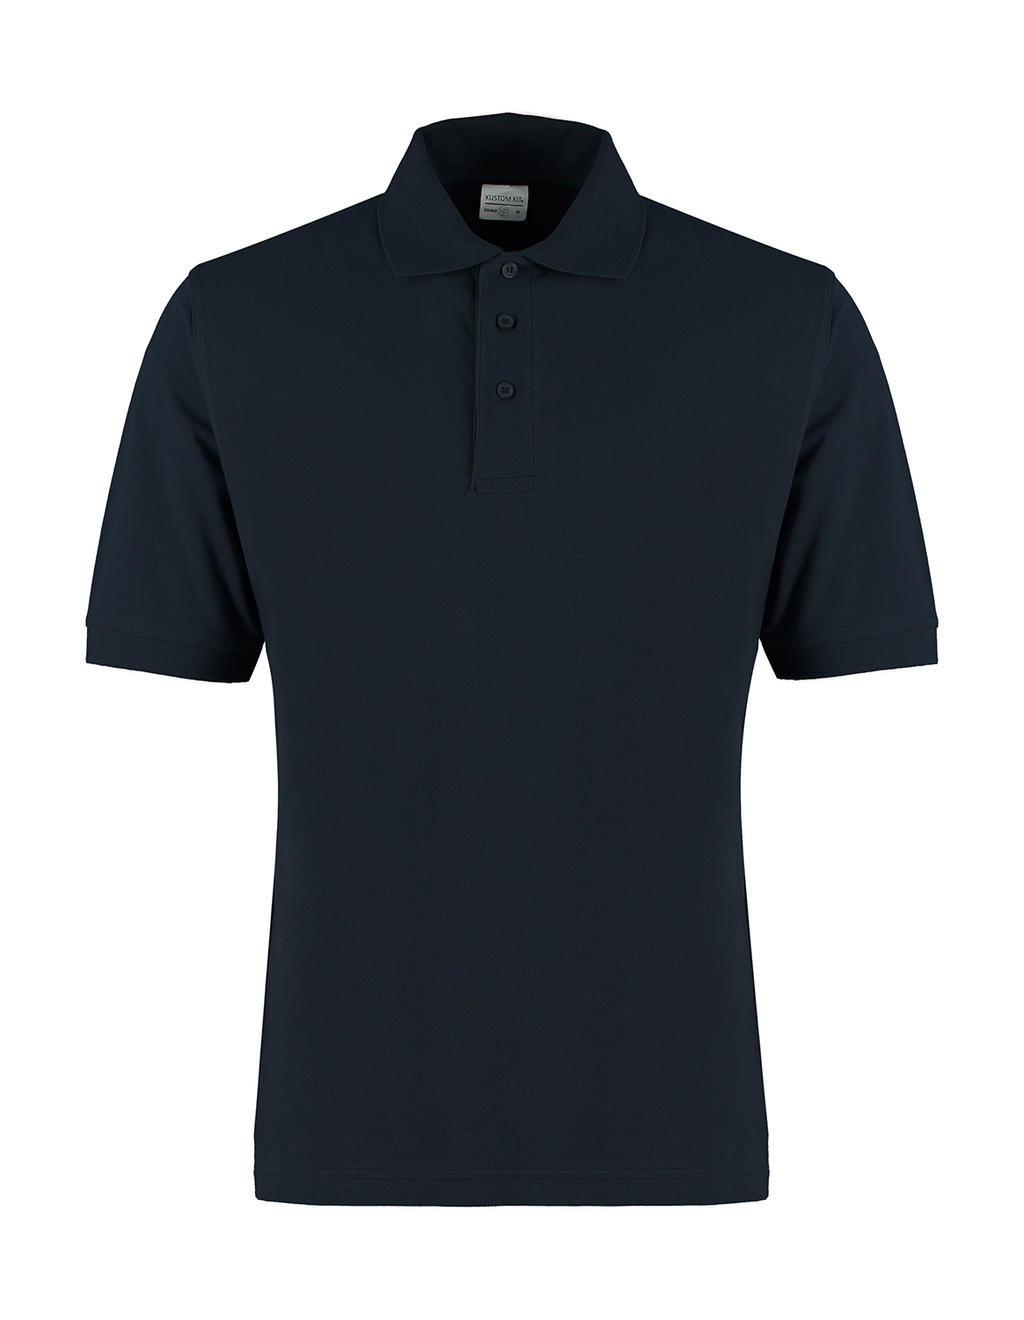  Classic Fit Cotton Klassic Superwash? 60? Polo in Farbe Navy